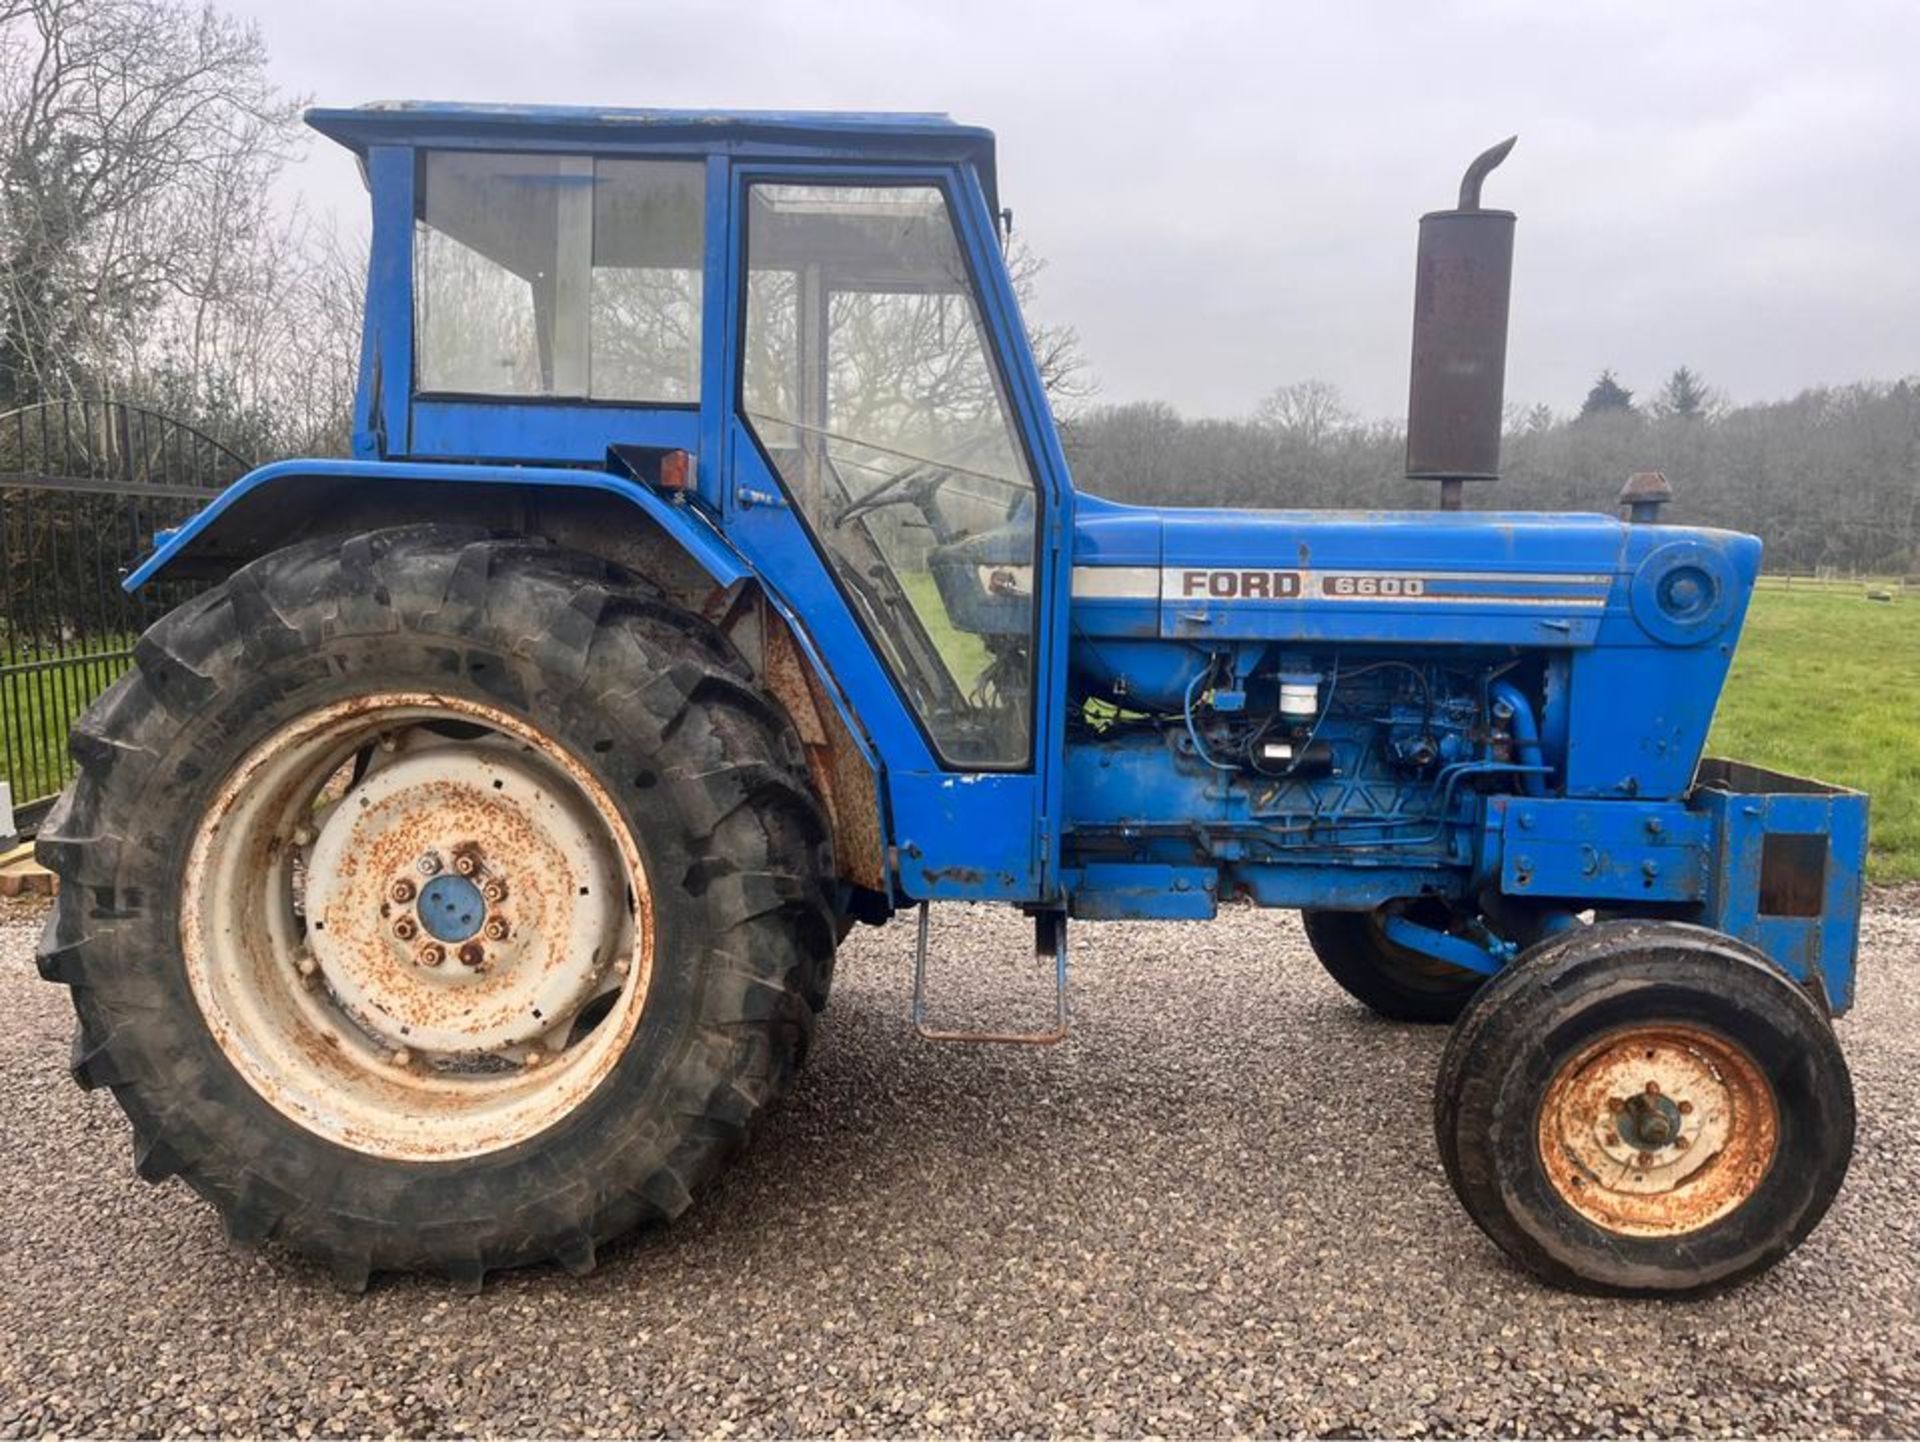 1980, FORD 6600 Tractor (2WD)